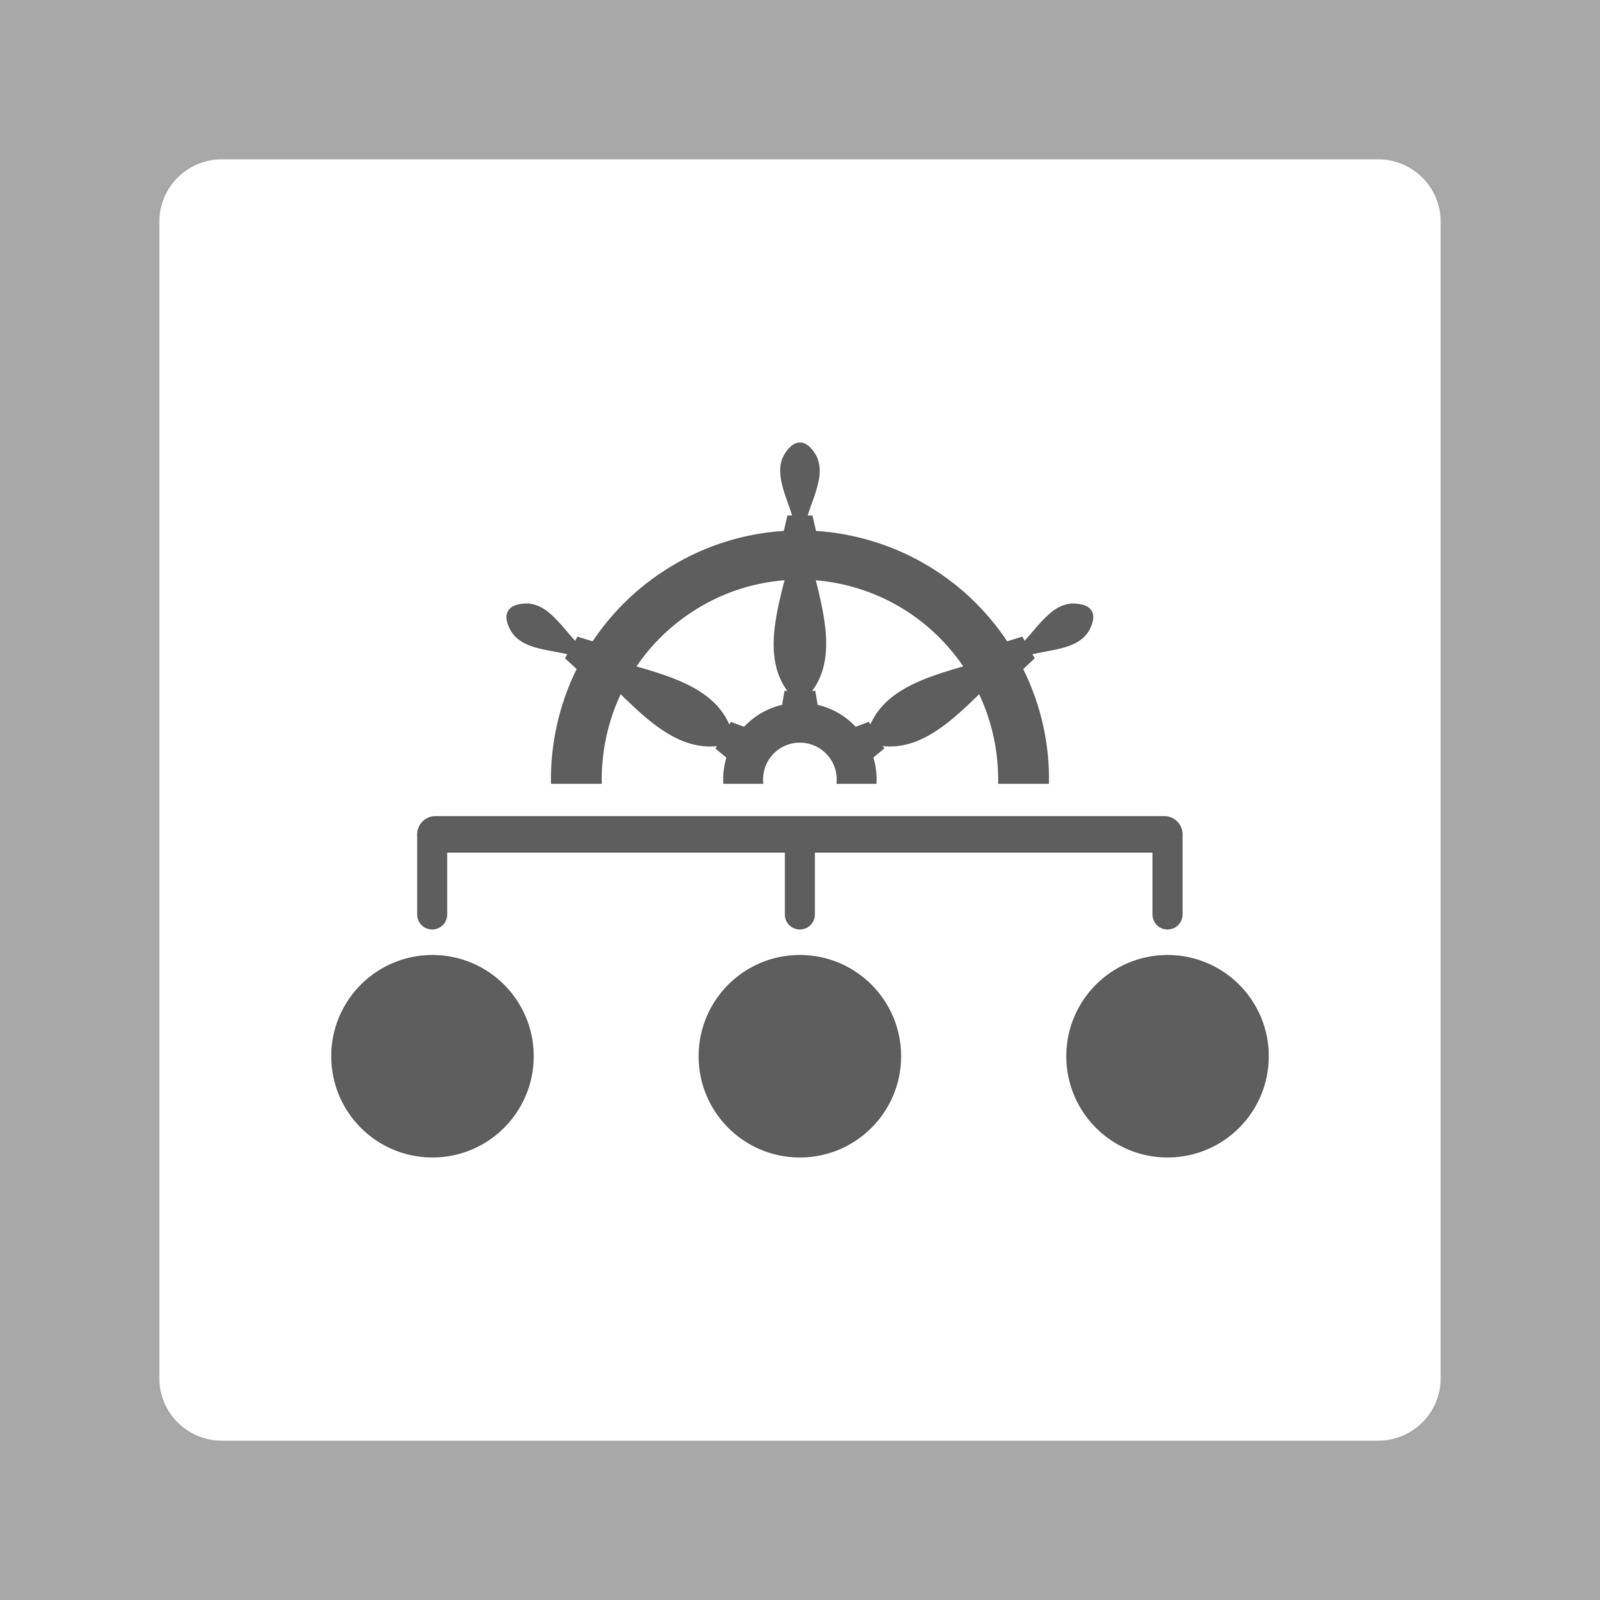 Rule icon. Vector style is dark gray and white colors, flat rounded square button on a silver background.